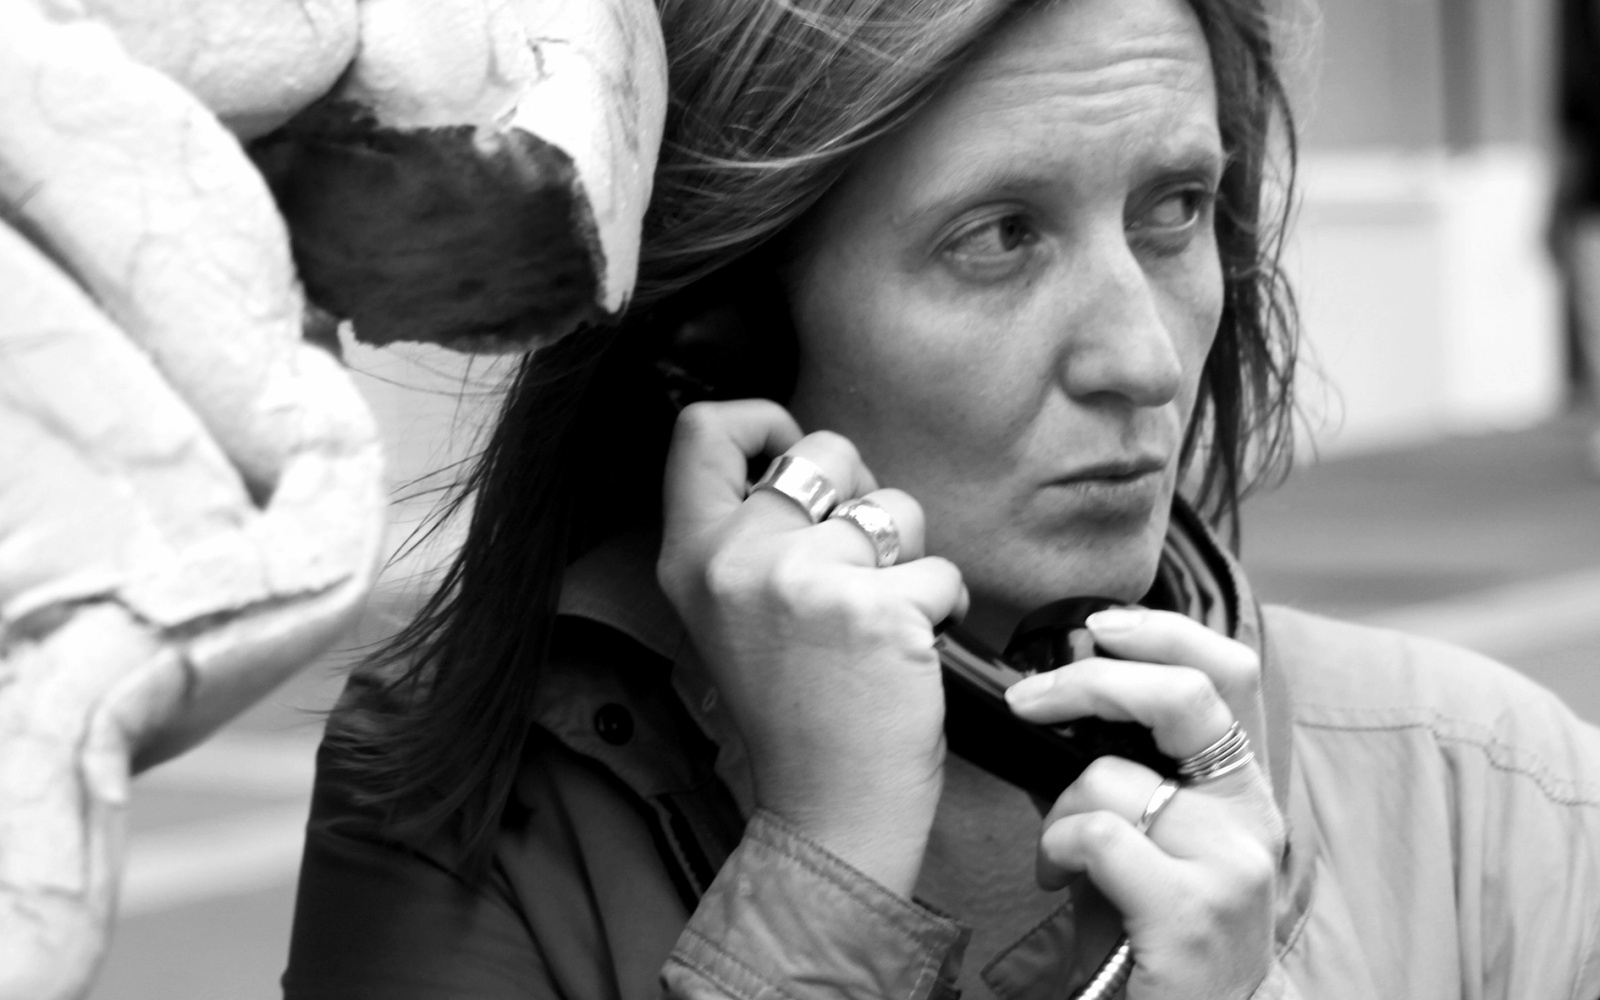 A black and white photo of a woman holding a corded phone